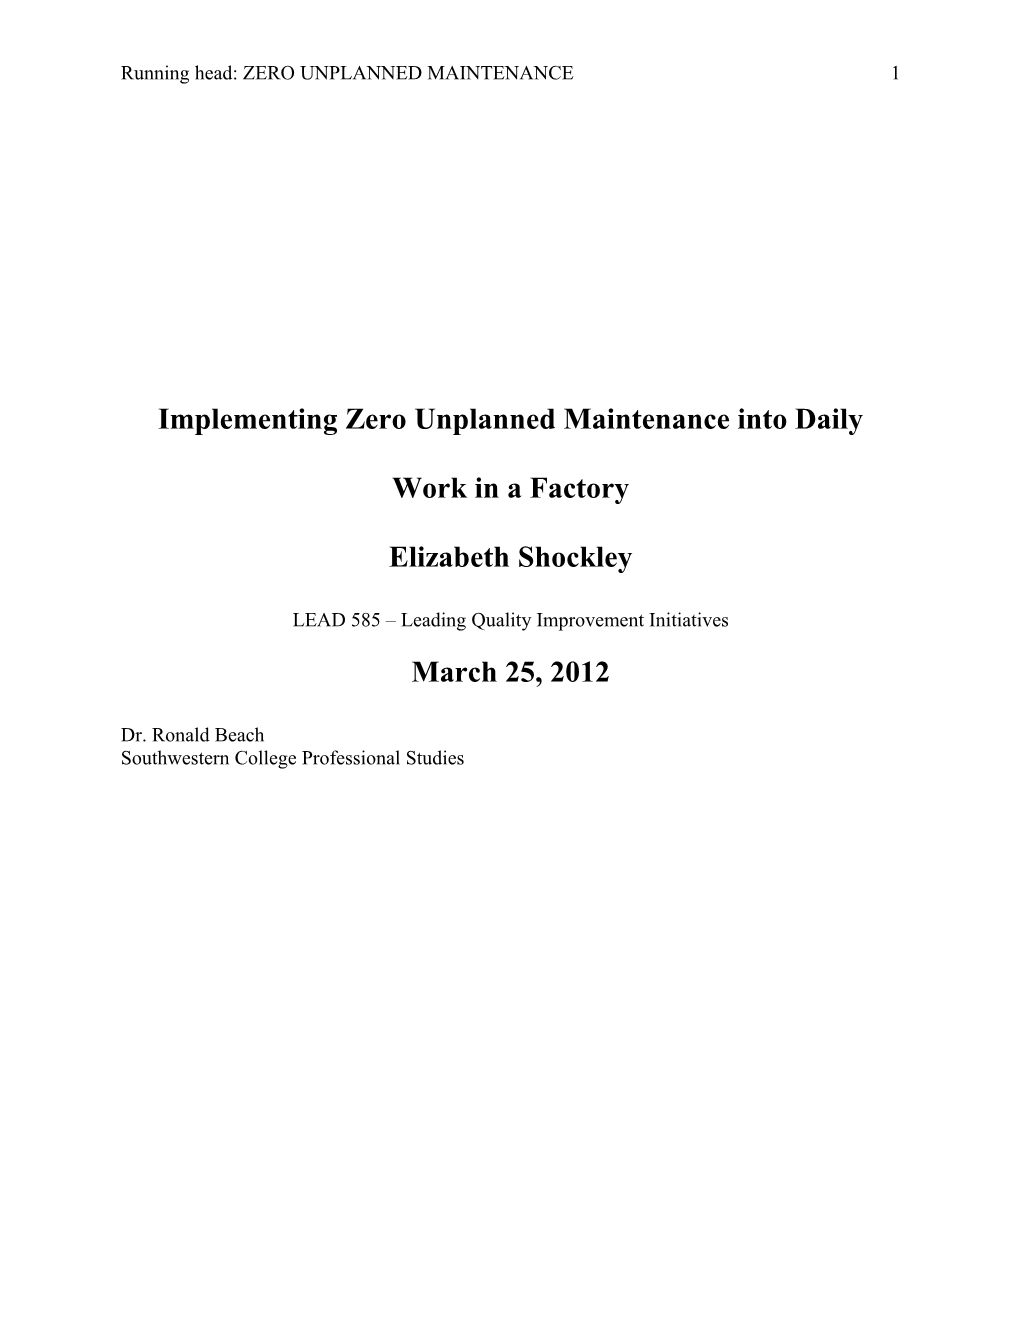 Implementing Zero Unplanned Maintenance Into Daily Work in a Factory